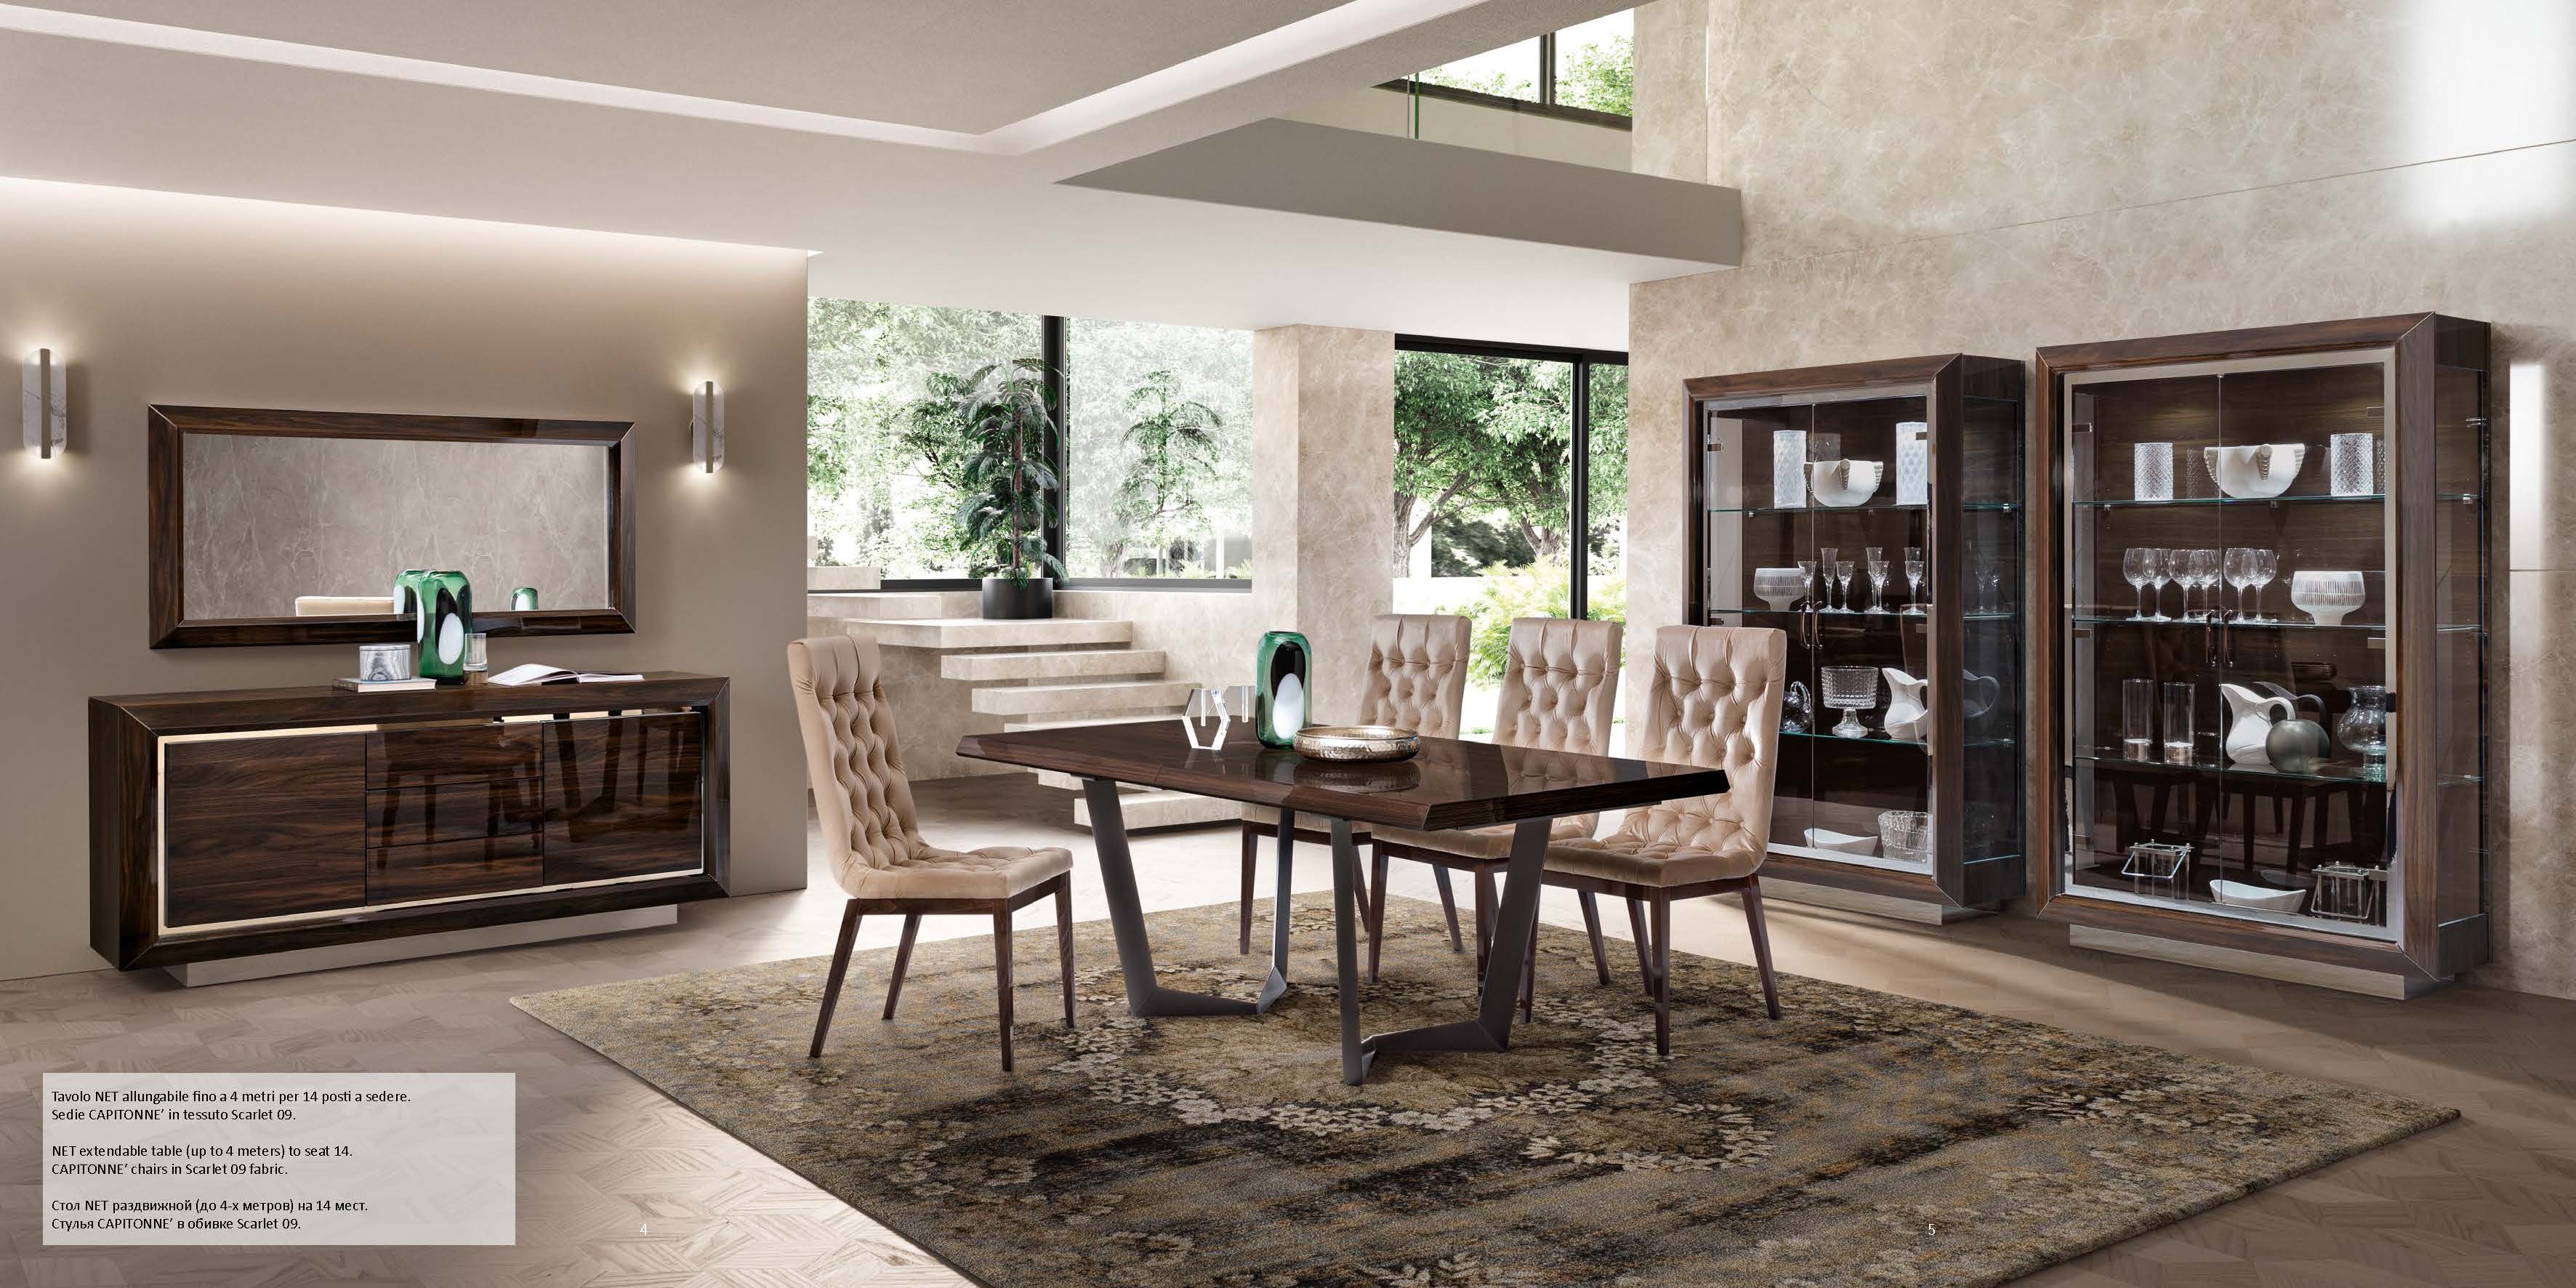 Dining Room Furniture Tables Elite Day Walnut Dining Additional items